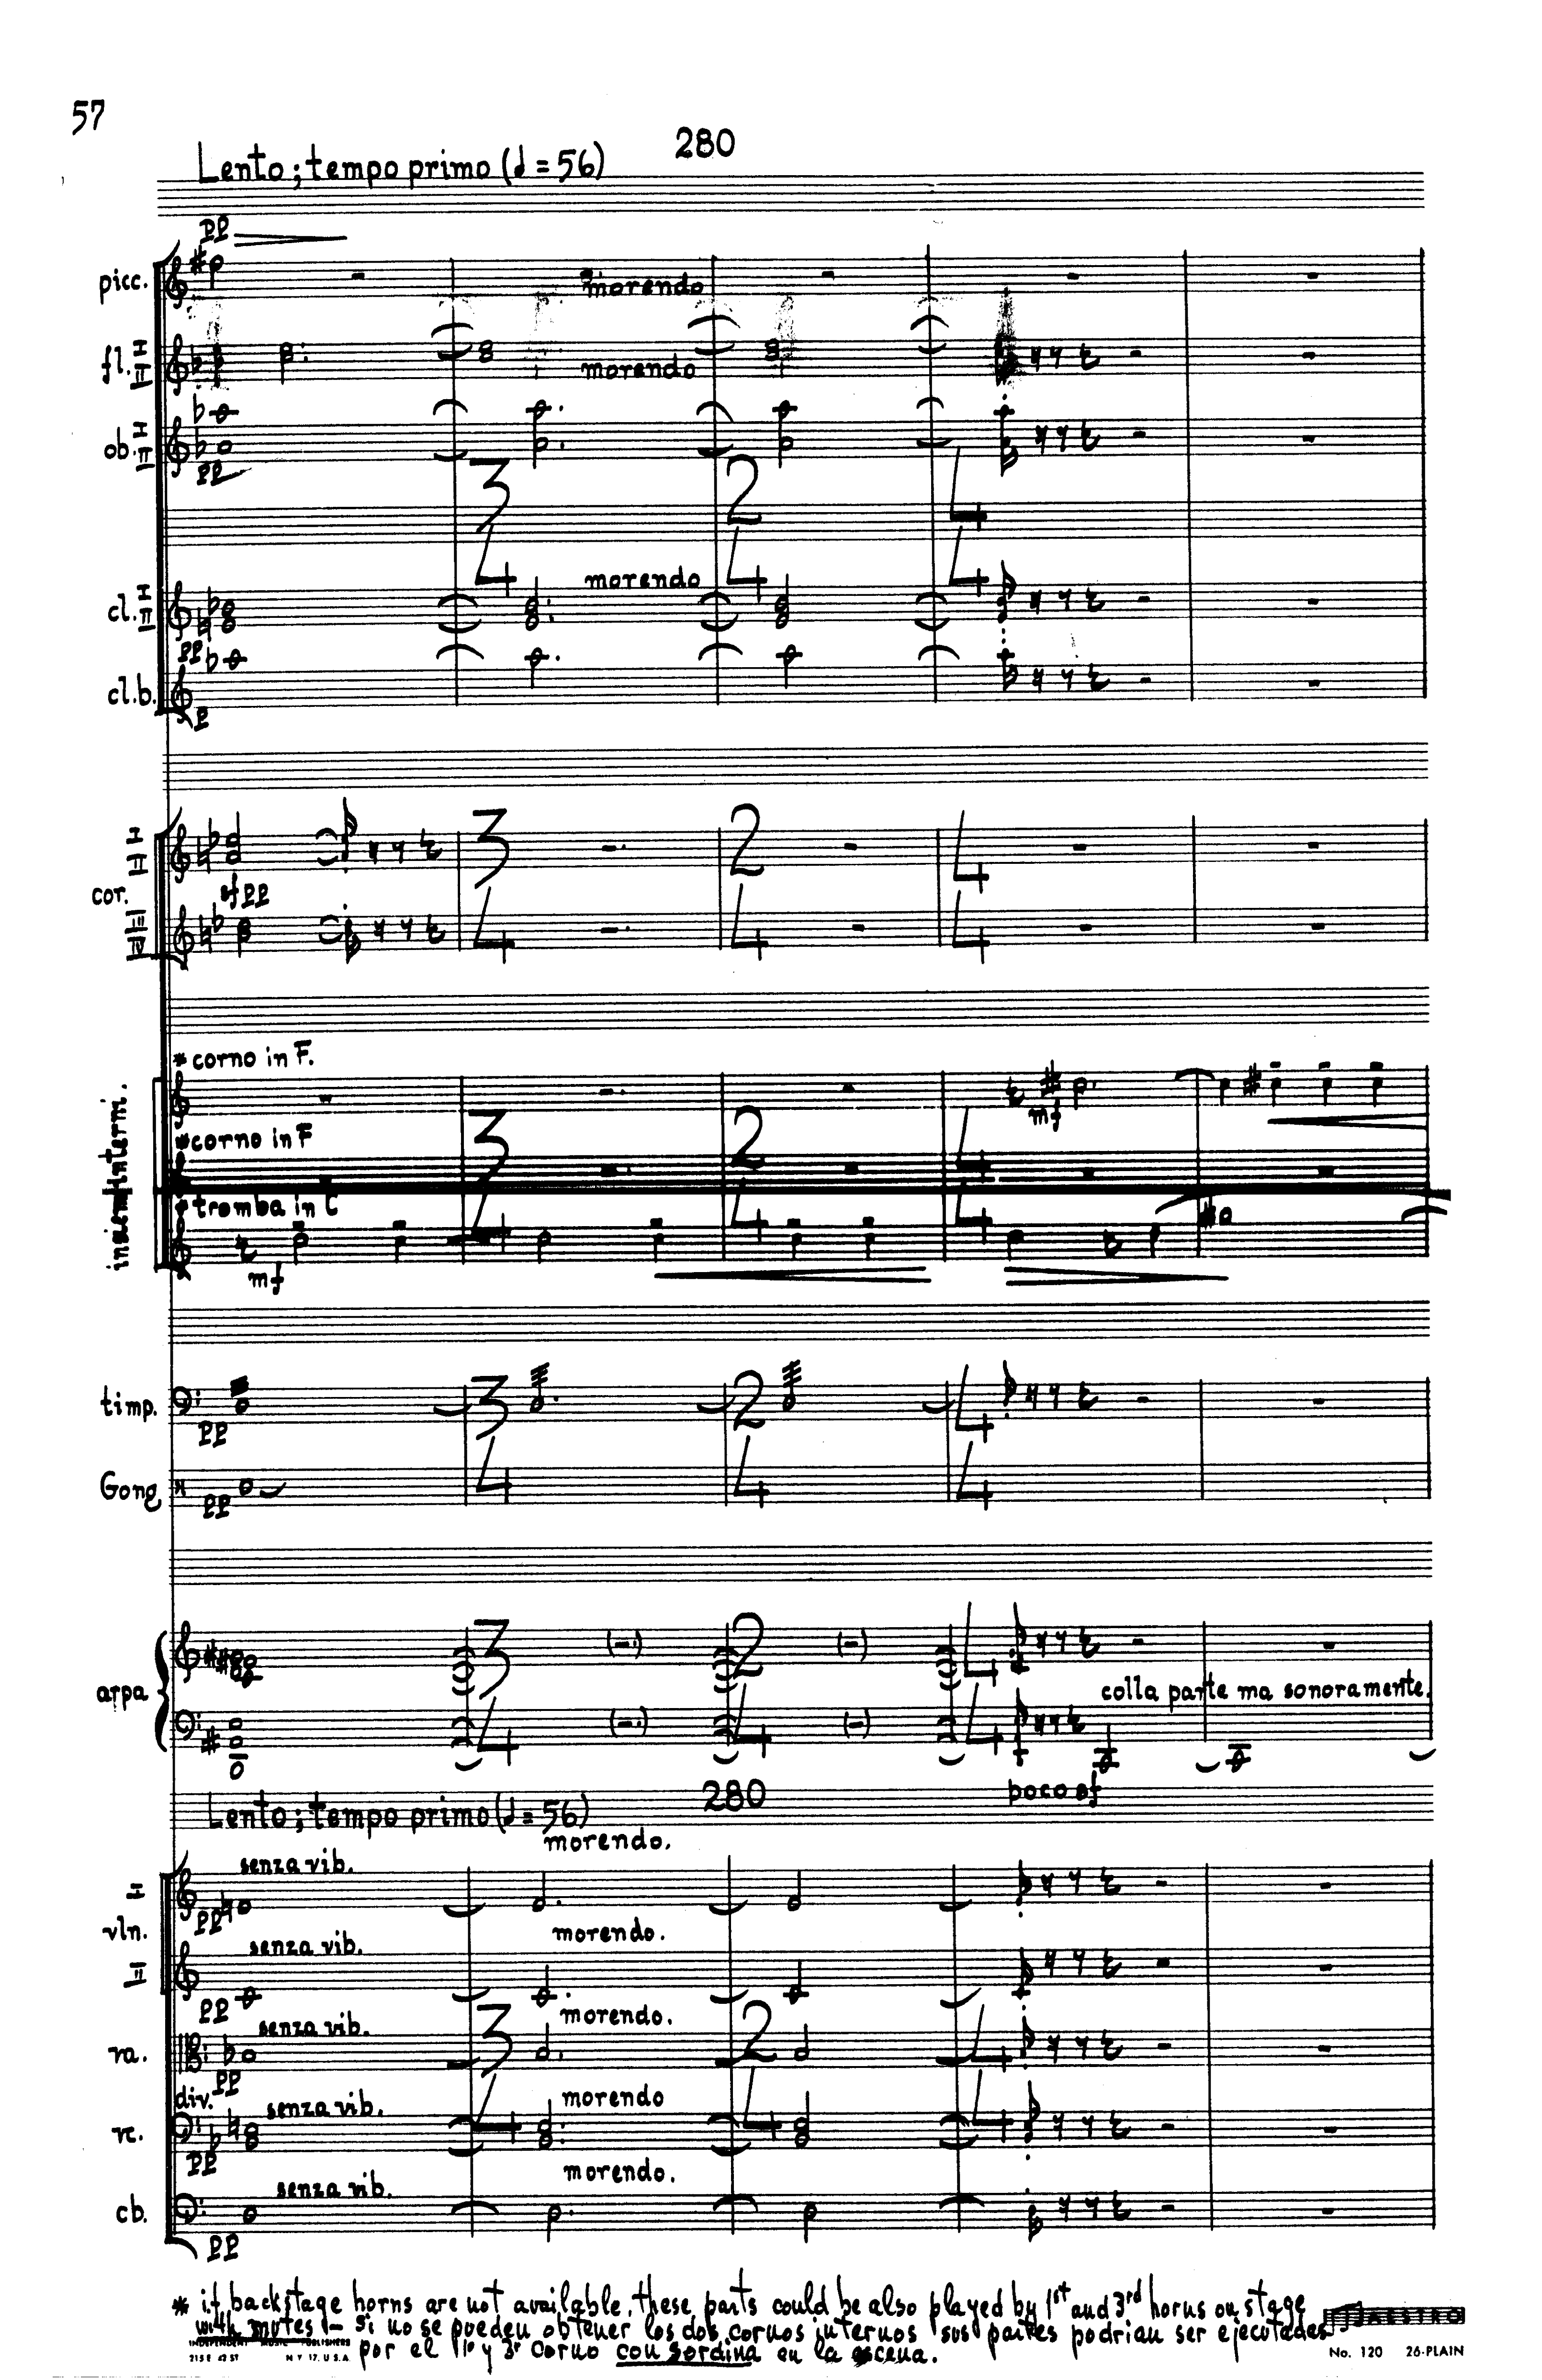 Score excerpt from Orrego-Salas's 4th Symphony